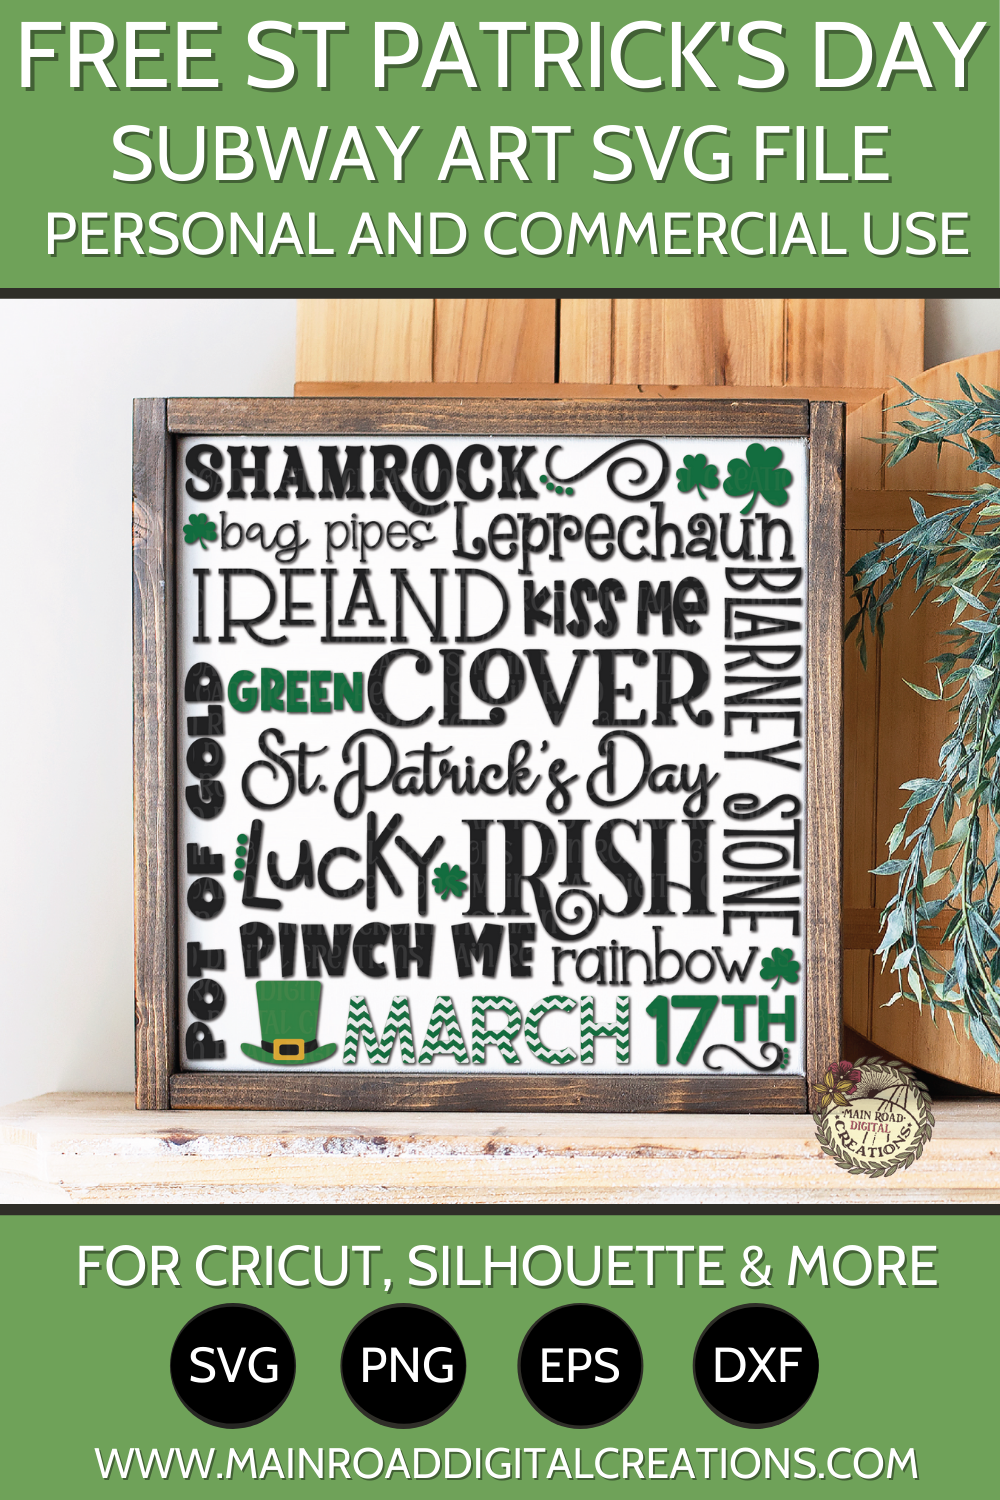 St. Patrick's Day Earrings Free SVG File for Cricut